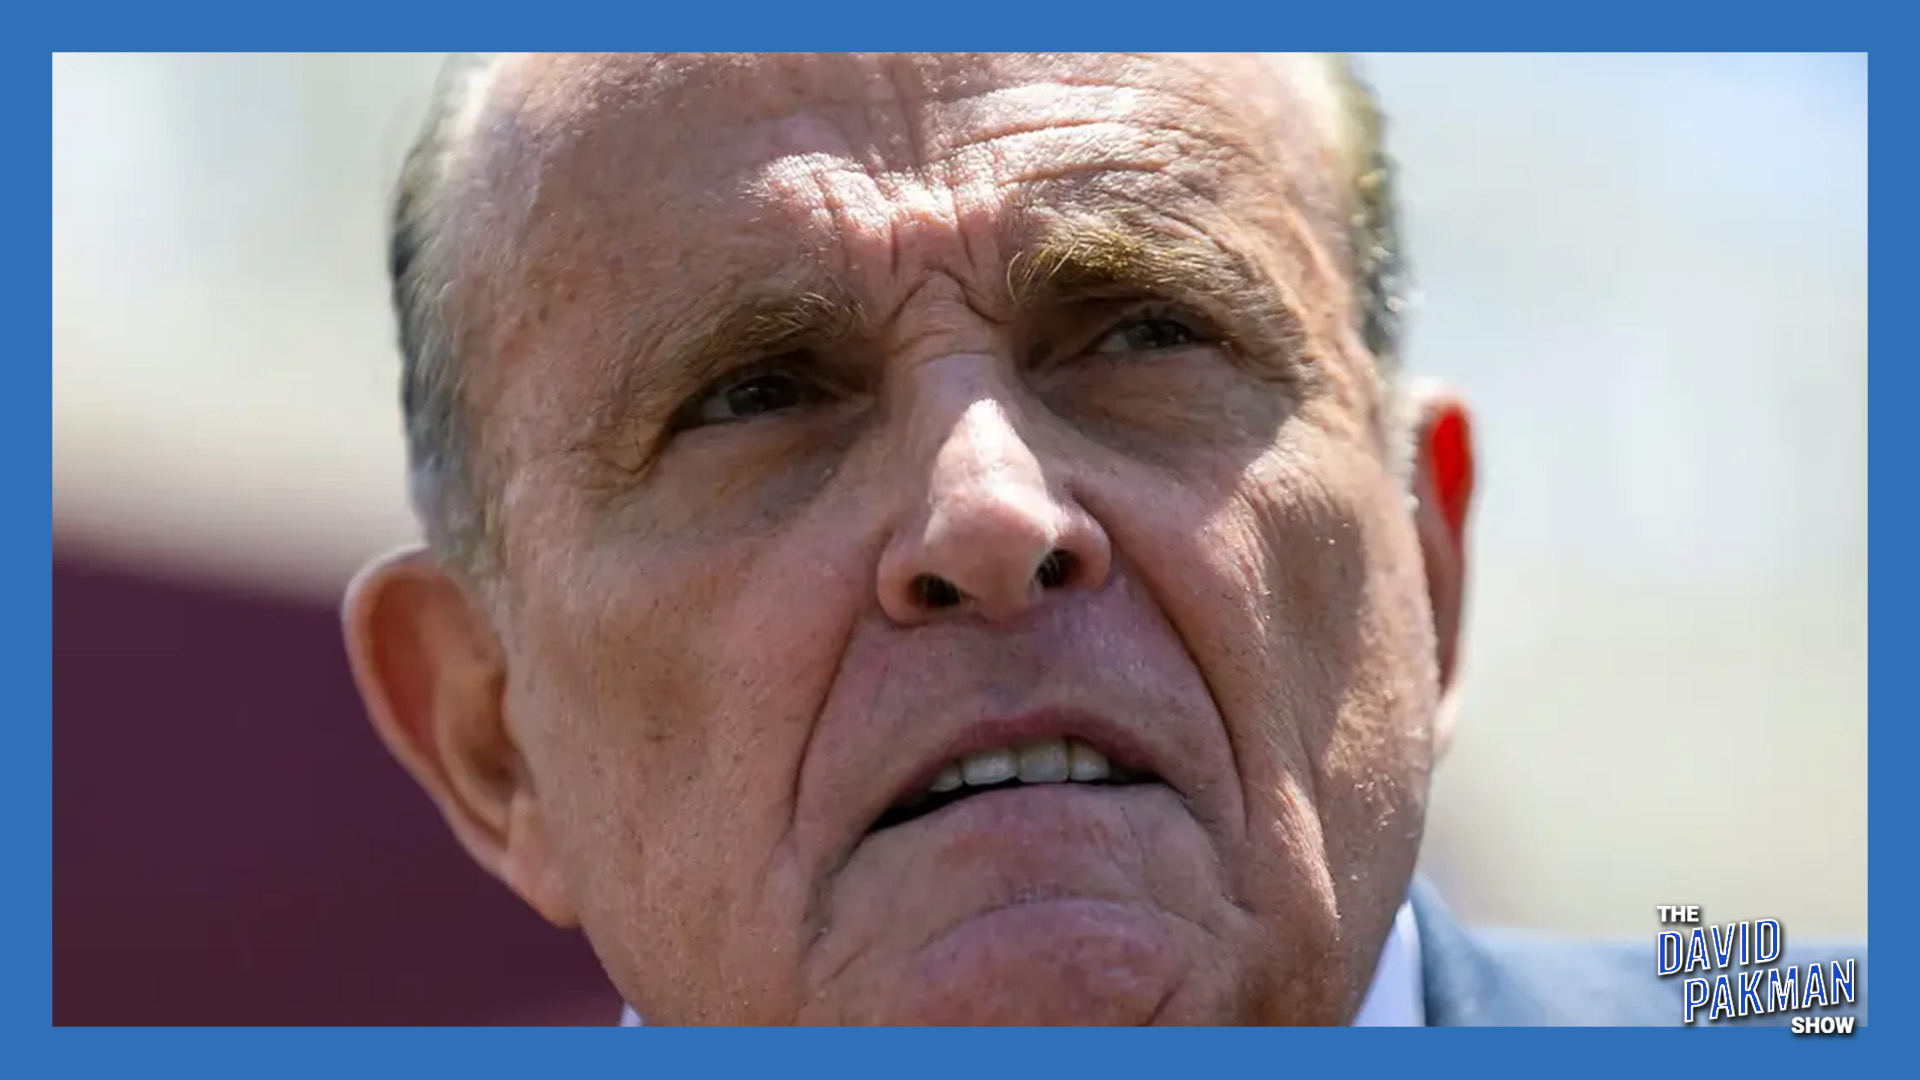 LOL: Even Newsmax Calls Out Rudy Giuliani's "Attack"